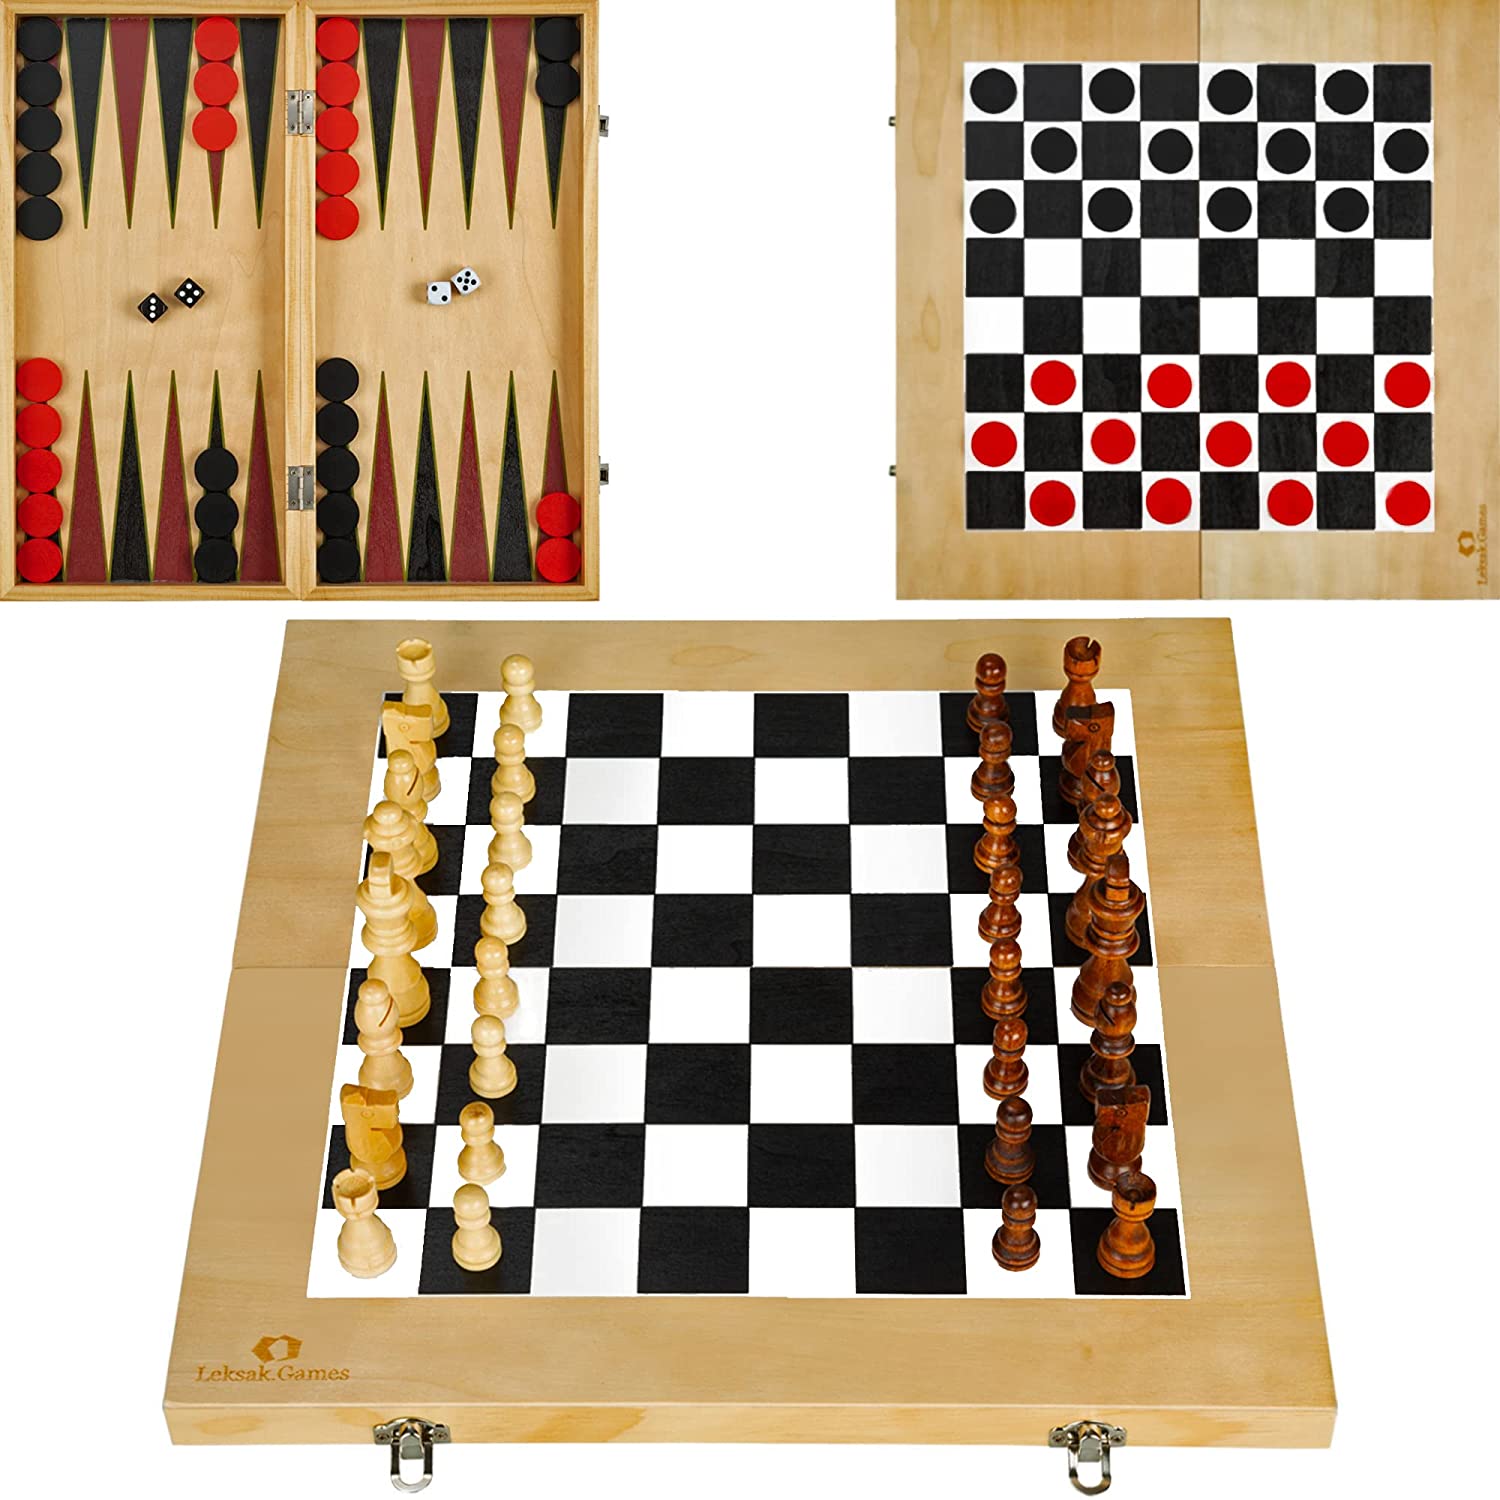 Wooden Chess Pieces Case Board Game 3 in 1 Chess Checkers Backgammon Set 